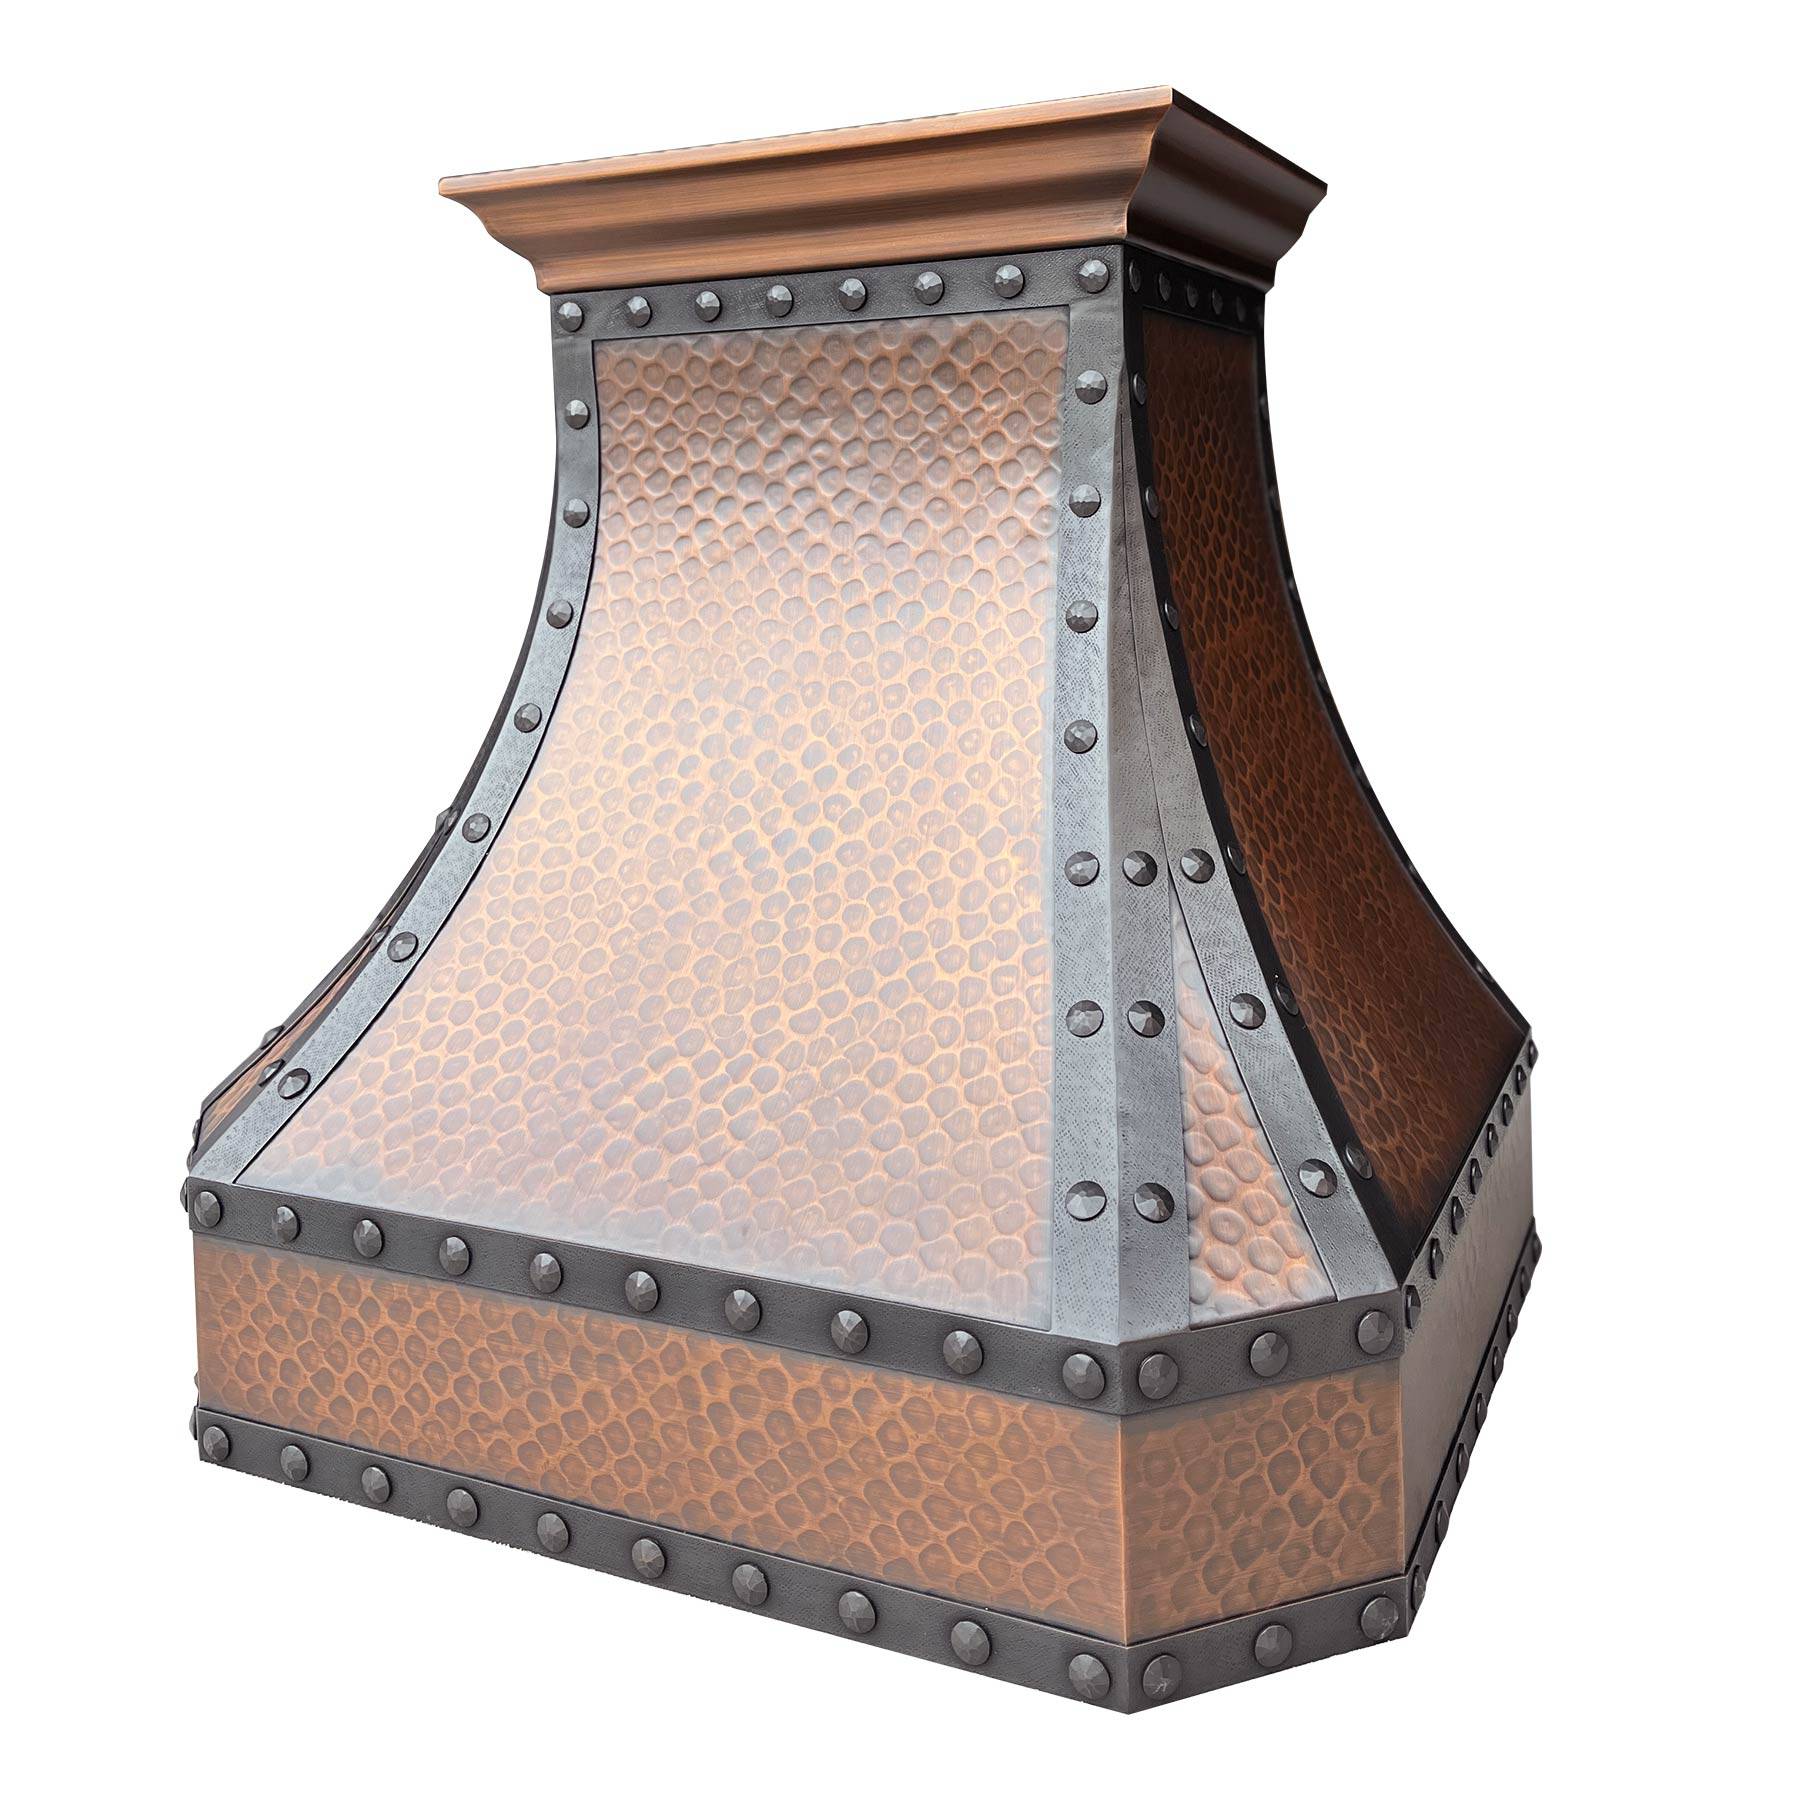 Fobest Custom Hammered Antique Copper Kitchen Hood with black strapping and rivet FCP-10 - Copper Range Hood-Fobest Appliance